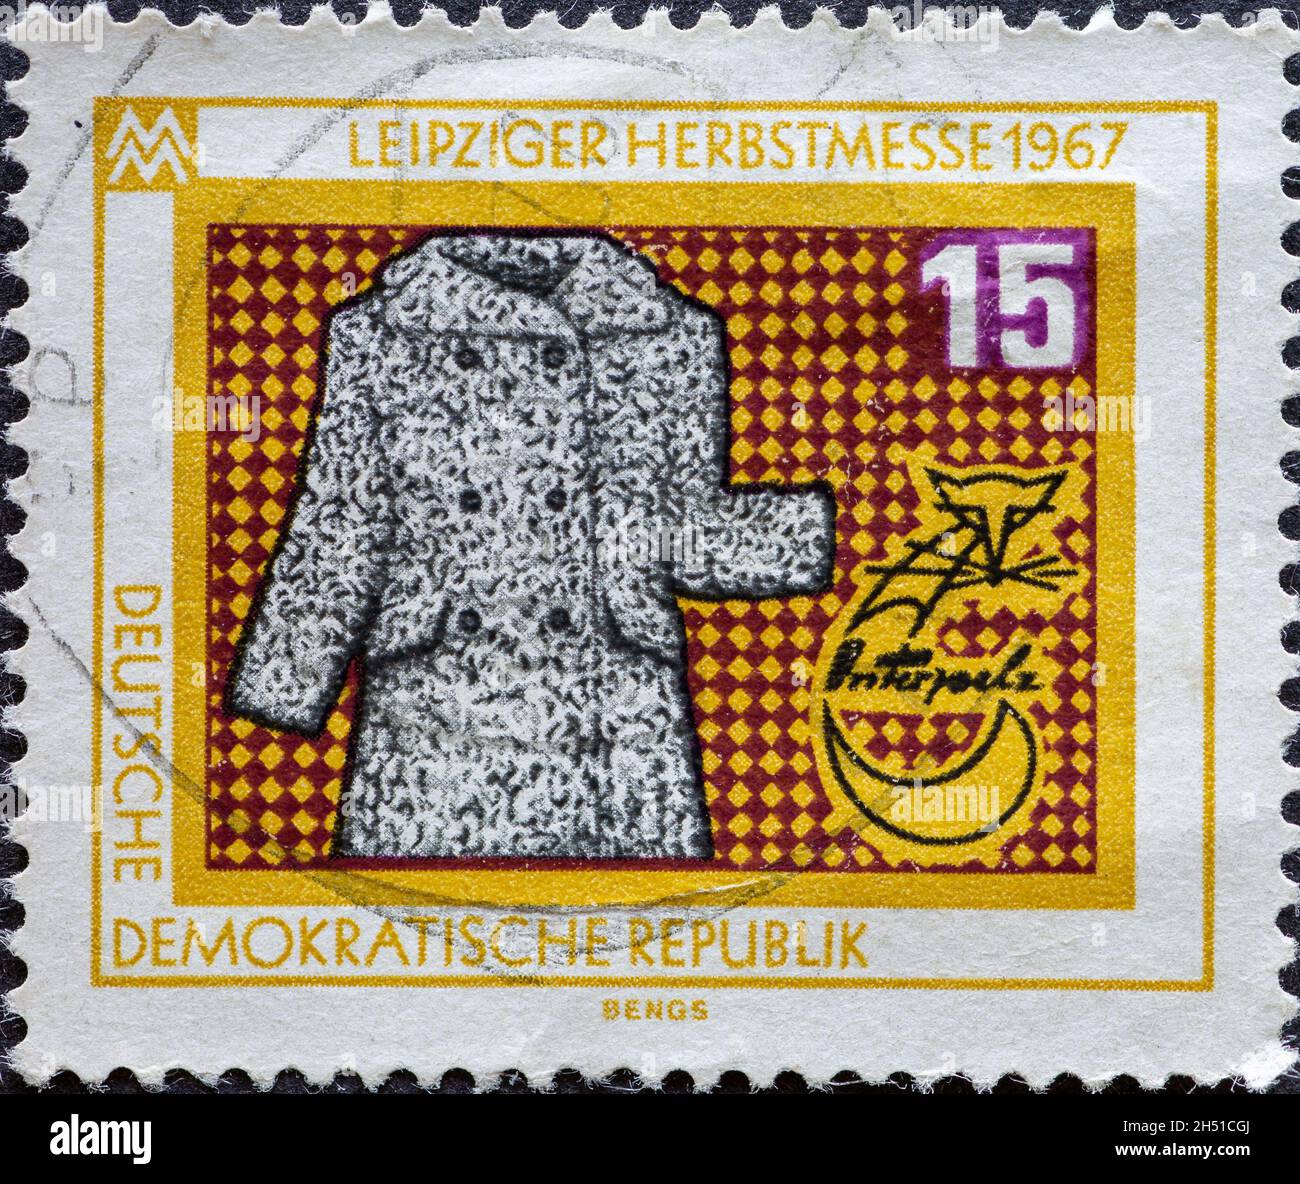 GERMANY, DDR - CIRCA 1967: a postage stamp from Germany, GDR showing a fur coat for the Leipzig Autumn Fair 1967 Stock Photo